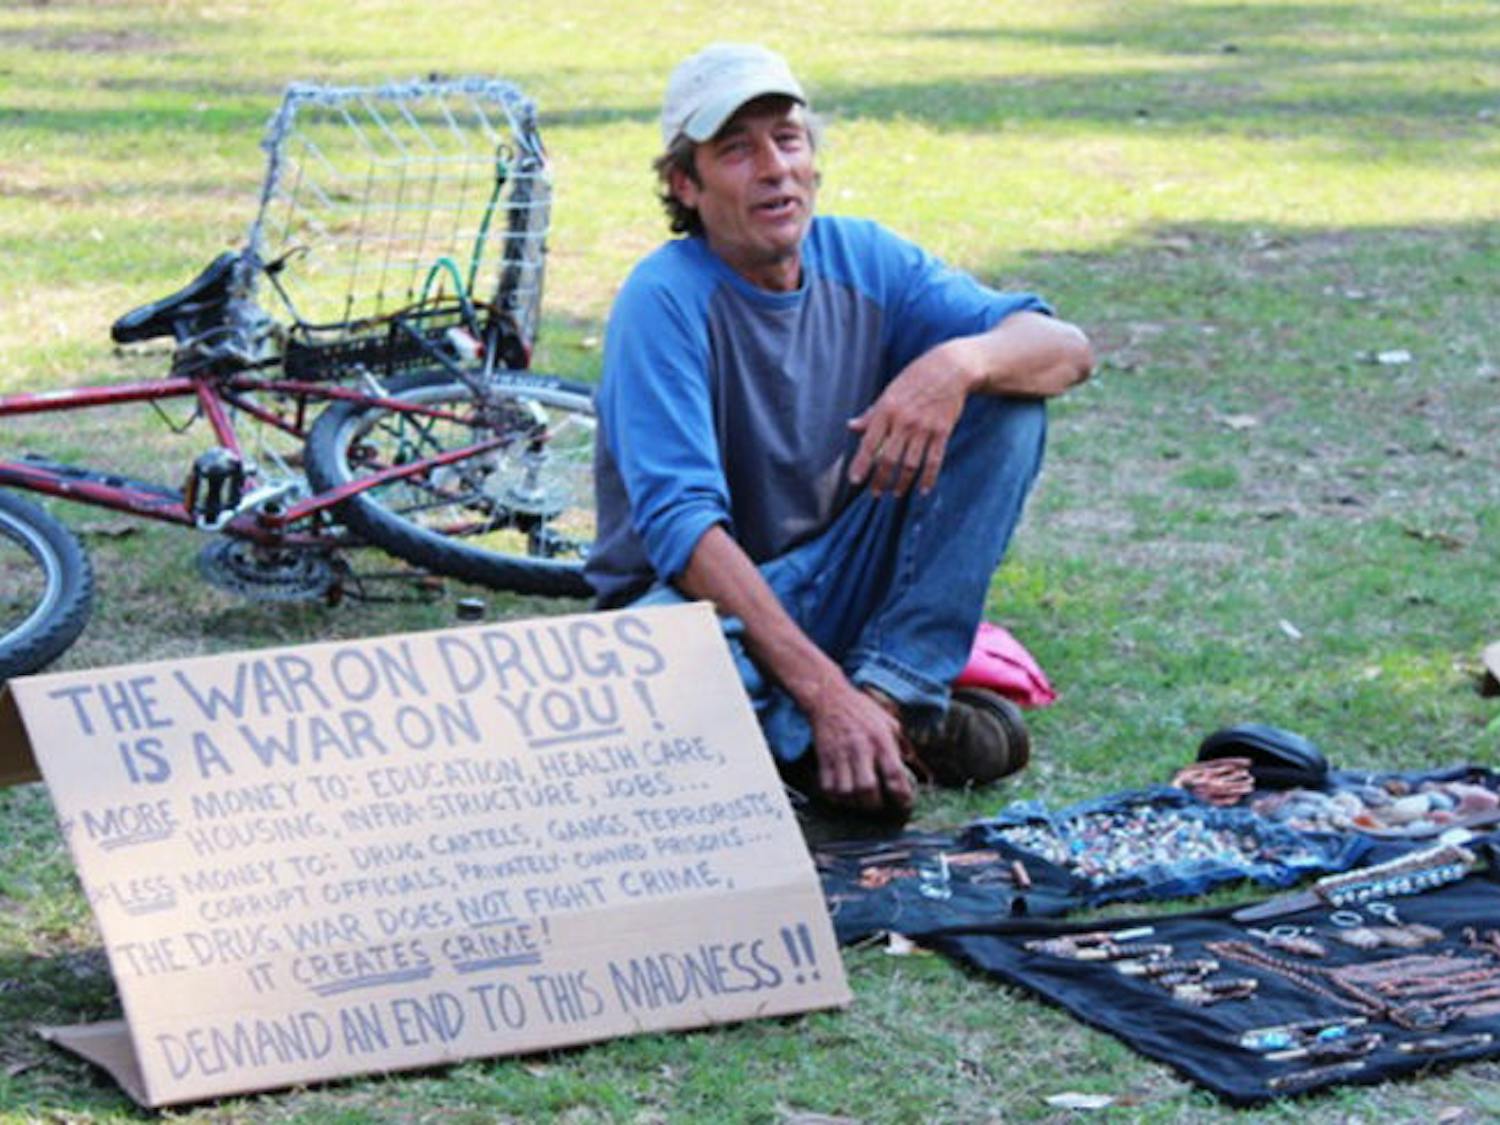 David Erickson, also known as D. Sinn, sits on the lawn on Plaza of the Americas on Monday afternoon. His art exhibit is titled Living Art in America. Erickson is often found around campus selling knickknacks to students passing through the plaza.